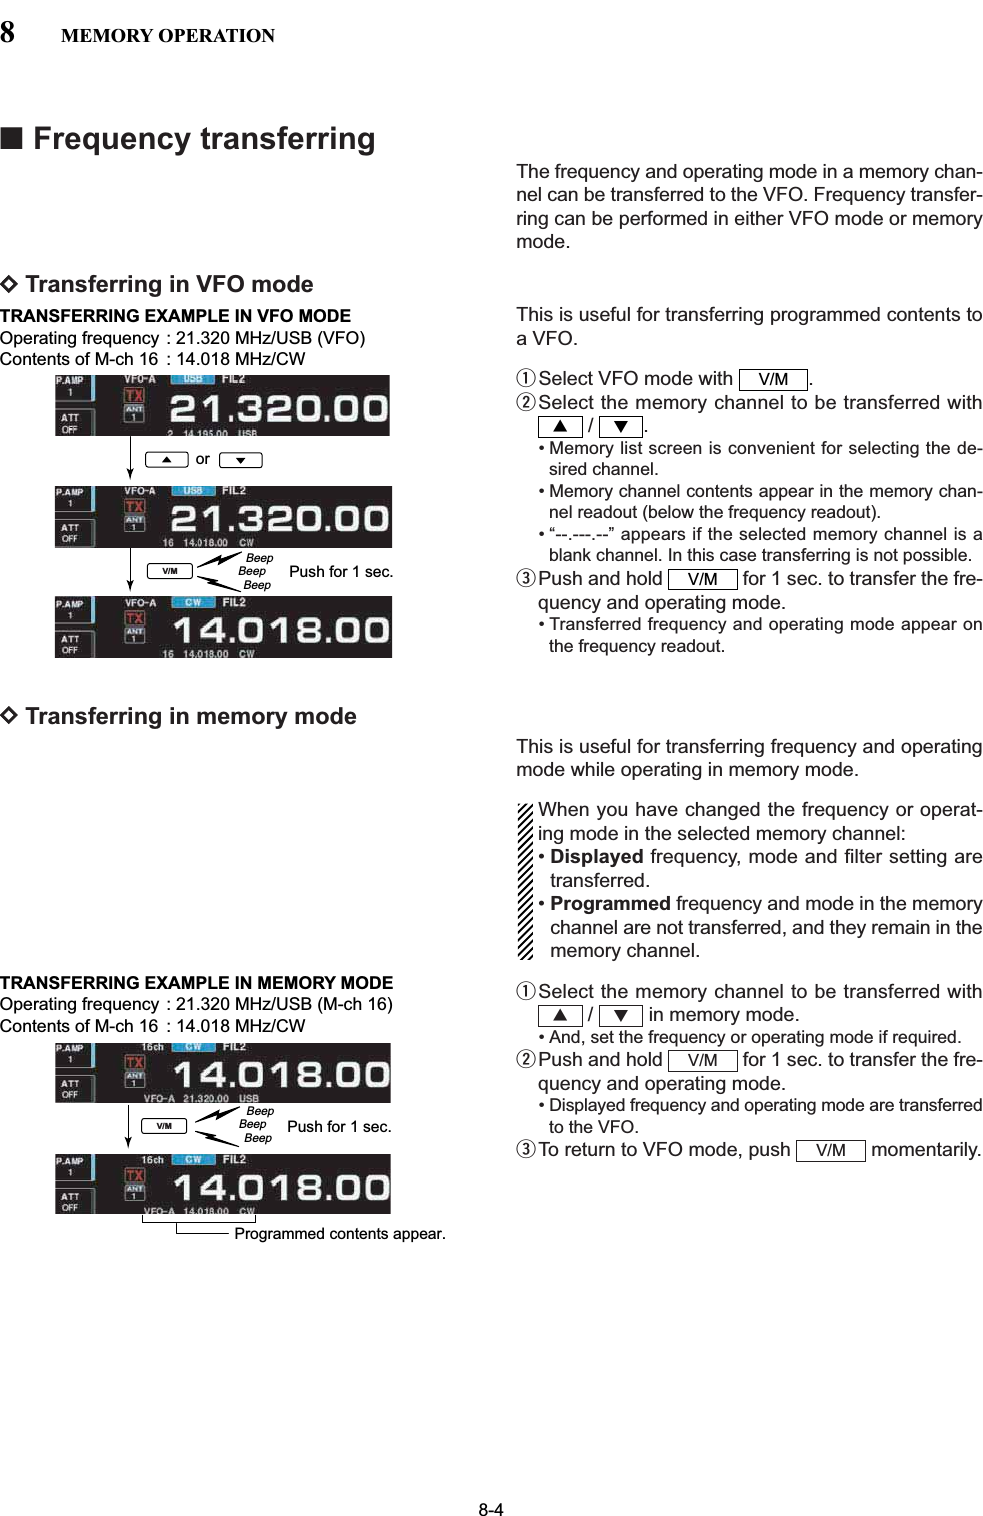 ■Frequency transferringThe frequency and operating mode in a memory chan-nel can be transferred to the VFO. Frequency transfer-ring can be performed in either VFO mode or memorymode.DTransferring in VFO modeThis is useful for transferring programmed contents toa VFO.qSelect VFO mode with  .wSelect the memory channel to be transferred with/ .• Memory list screen is convenient for selecting the de-sired channel.• Memory channel contents appear in the memory chan-nel readout (below the frequency readout).• “--.---.--” appears if the selected memory channel is ablank channel. In this case transferring is not possible.ePush and hold  for 1 sec. to transfer the fre-quency and operating mode.• Transferred frequency and operating mode appear onthe frequency readout.DTransferring in memory modeThis is useful for transferring frequency and operatingmode while operating in memory mode.When you have changed the frequency or operat-ing mode in the selected memory channel:•Displayed frequency, mode and filter setting aretransferred.•Programmed frequency and mode in the memorychannel are not transferred, and they remain in thememory channel.qSelect the memory channel to be transferred with/  in memory mode.• And, set the frequency or operating mode if required.wPush and hold  for 1 sec. to transfer the fre-quency and operating mode.• Displayed frequency and operating mode are transferredto the VFO.eTo return to VFO mode, push  momentarily.V/MV/M√∫V/M√∫V/M8-48MEMORY OPERATIONTRANSFERRING EXAMPLE IN VFO MODEOperating frequency : 21.320 MHz/USB (VFO)Contents of M-ch 16 : 14.018 MHz/CWTRANSFERRING EXAMPLE IN MEMORY MODEOperating frequency : 21.320 MHz/USB (M-ch 16)Contents of M-ch 16 : 14.018 MHz/CWorPush for 1 sec.BeepBeepBeepV/MPush for 1 sec.BeepBeepBeepProgrammed contents appear.V/M